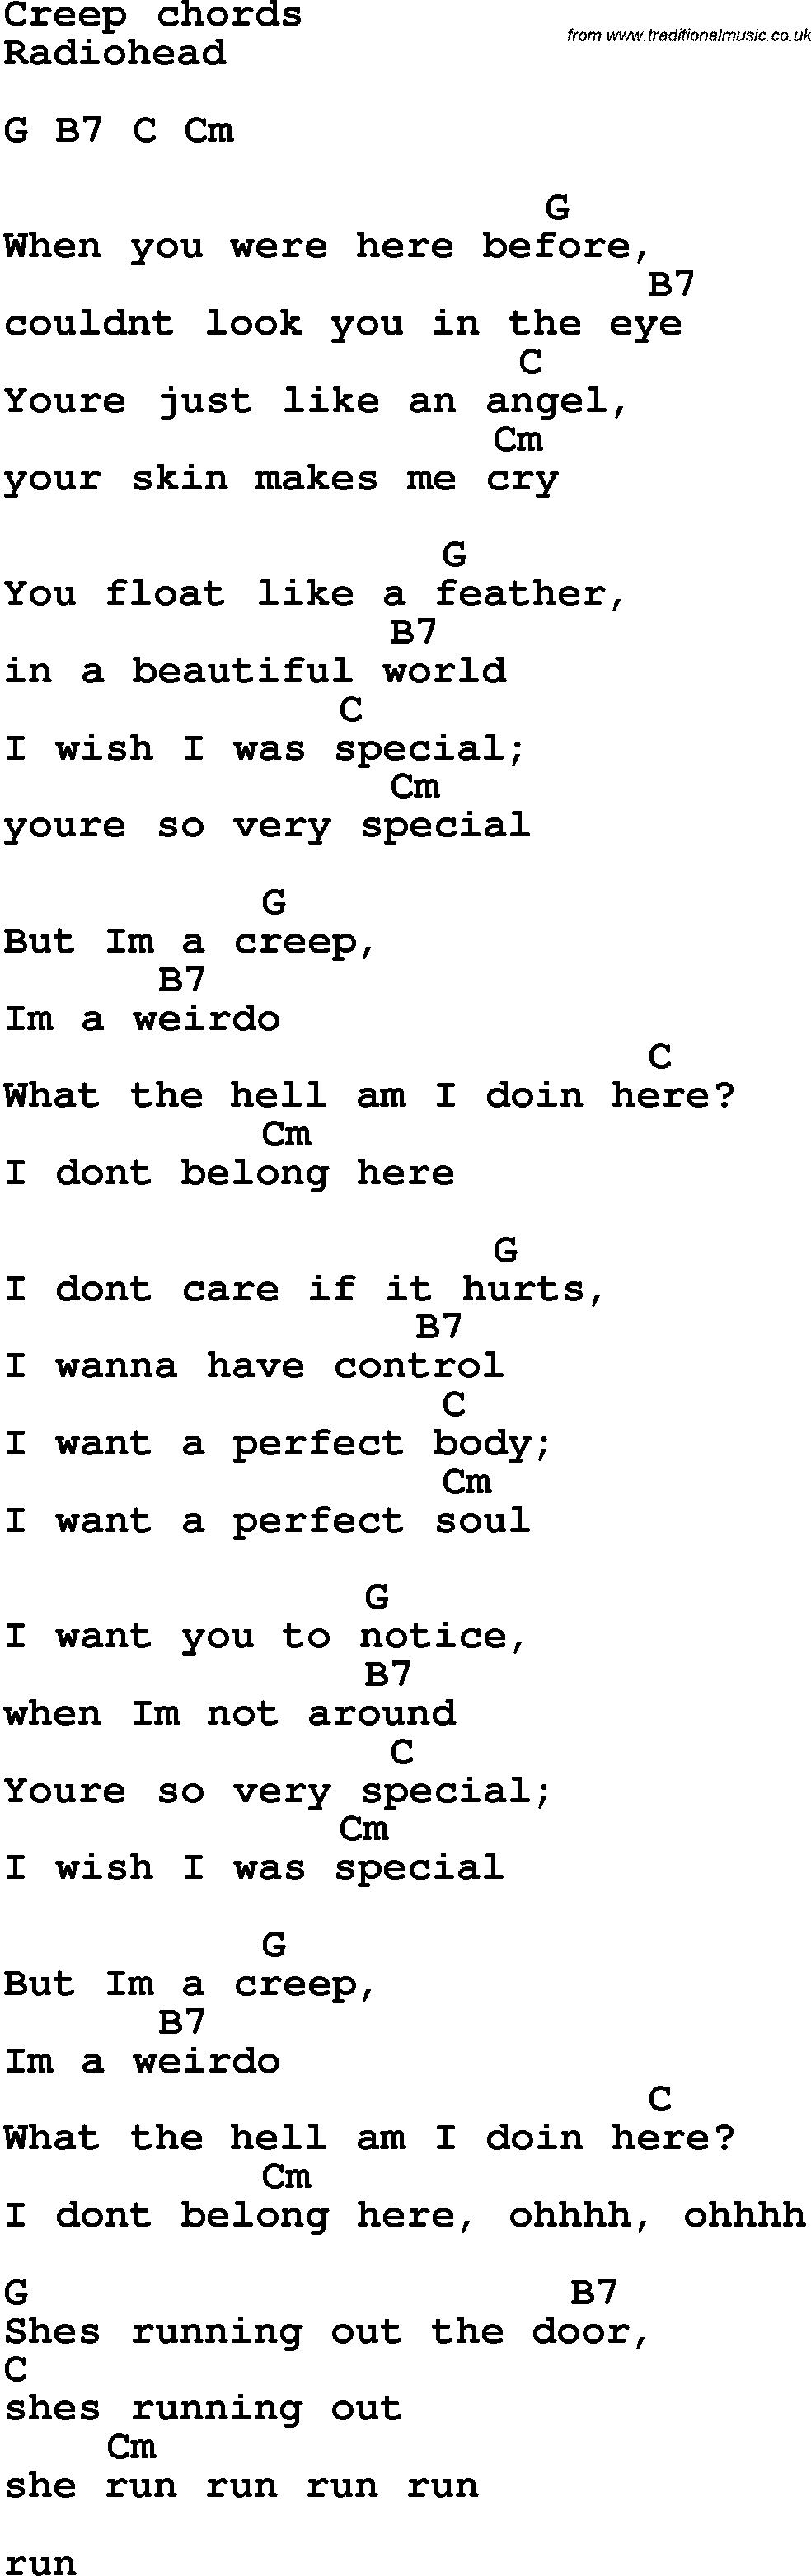 Song Lyrics with guitar chords for Creep